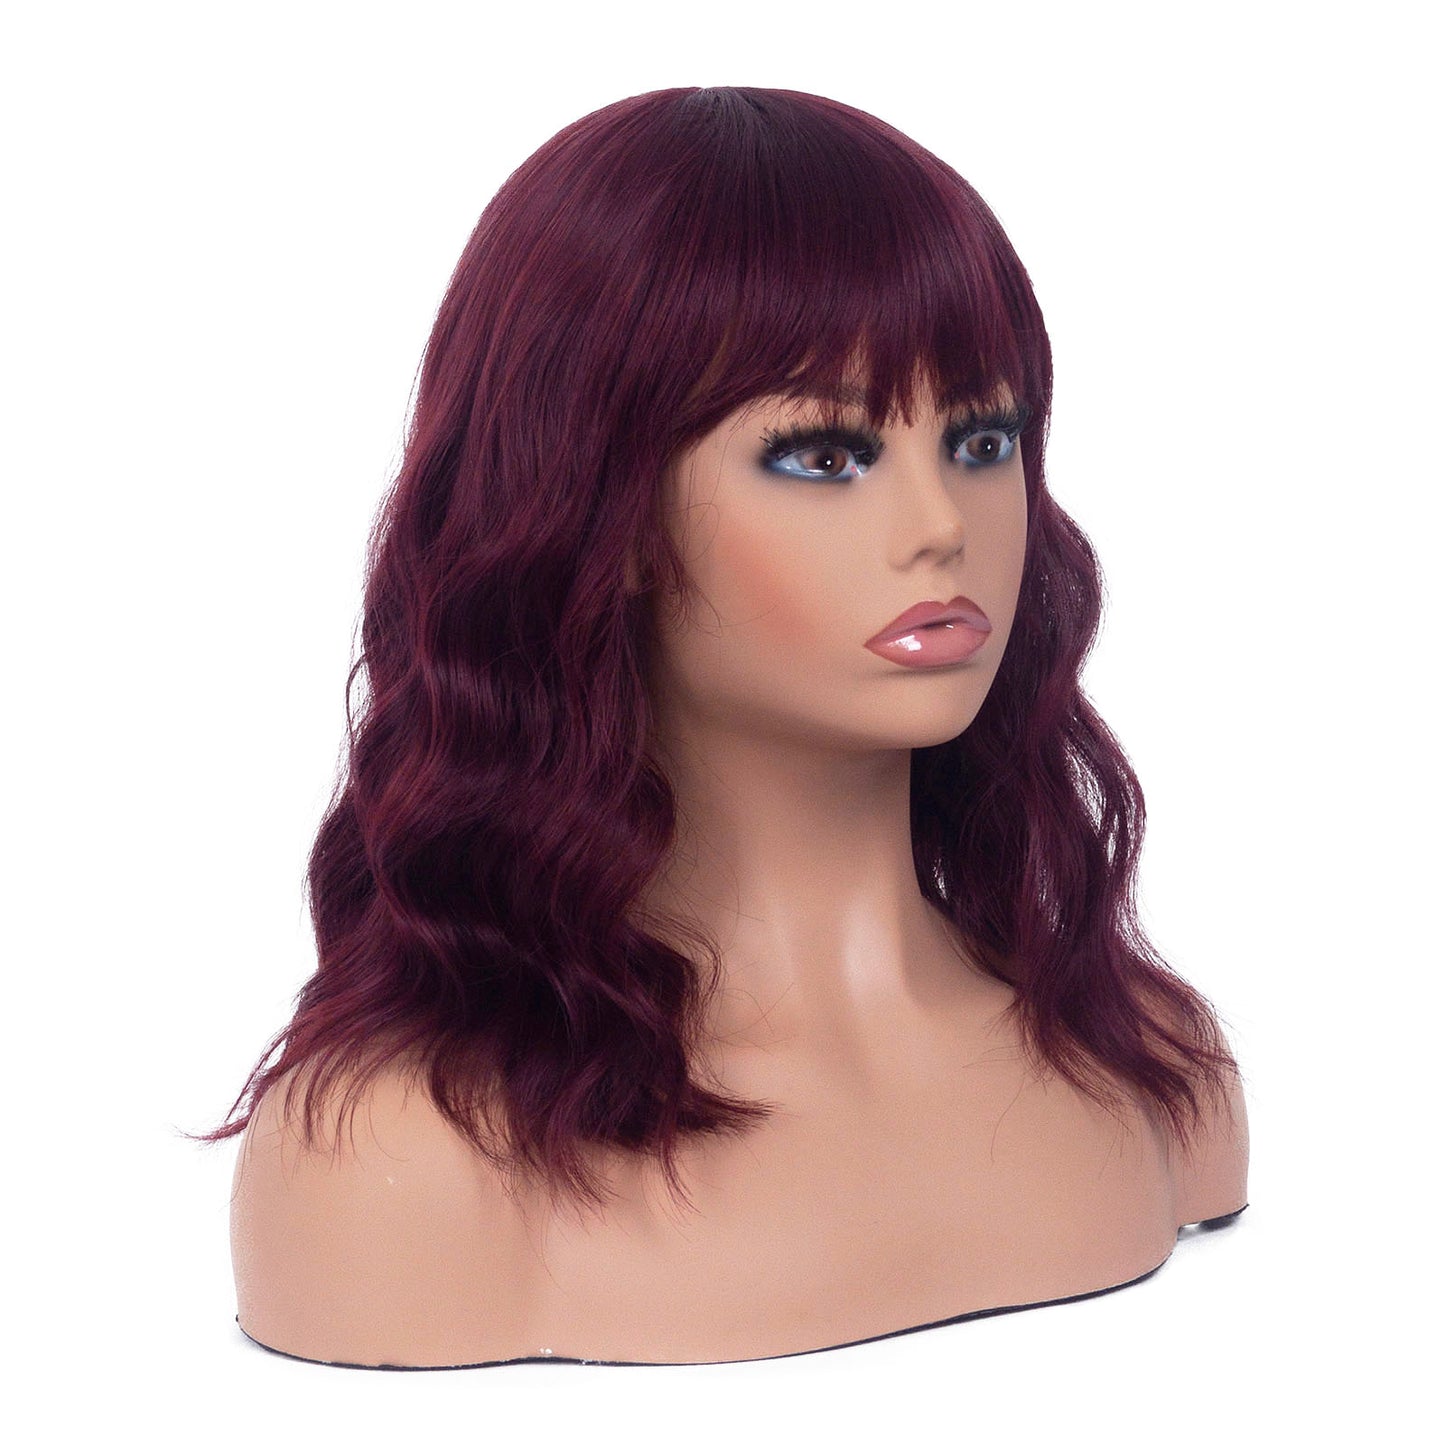 LINGDORA Curly Wine Red Wig with Bangs Cute Short Hair